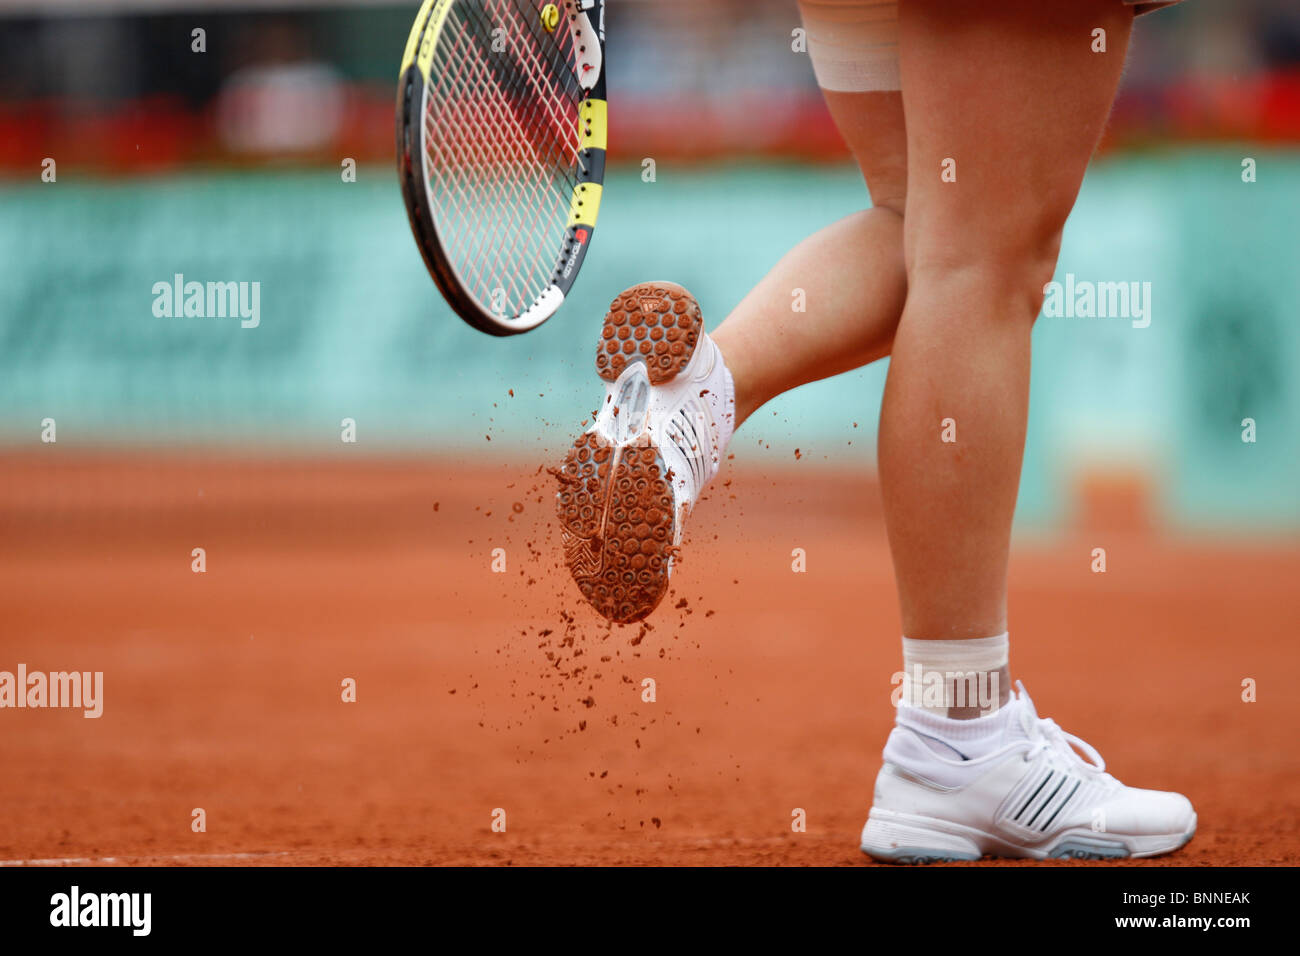 Tennis racket hitting sole of shoe to get rid of red clay Stock Photo